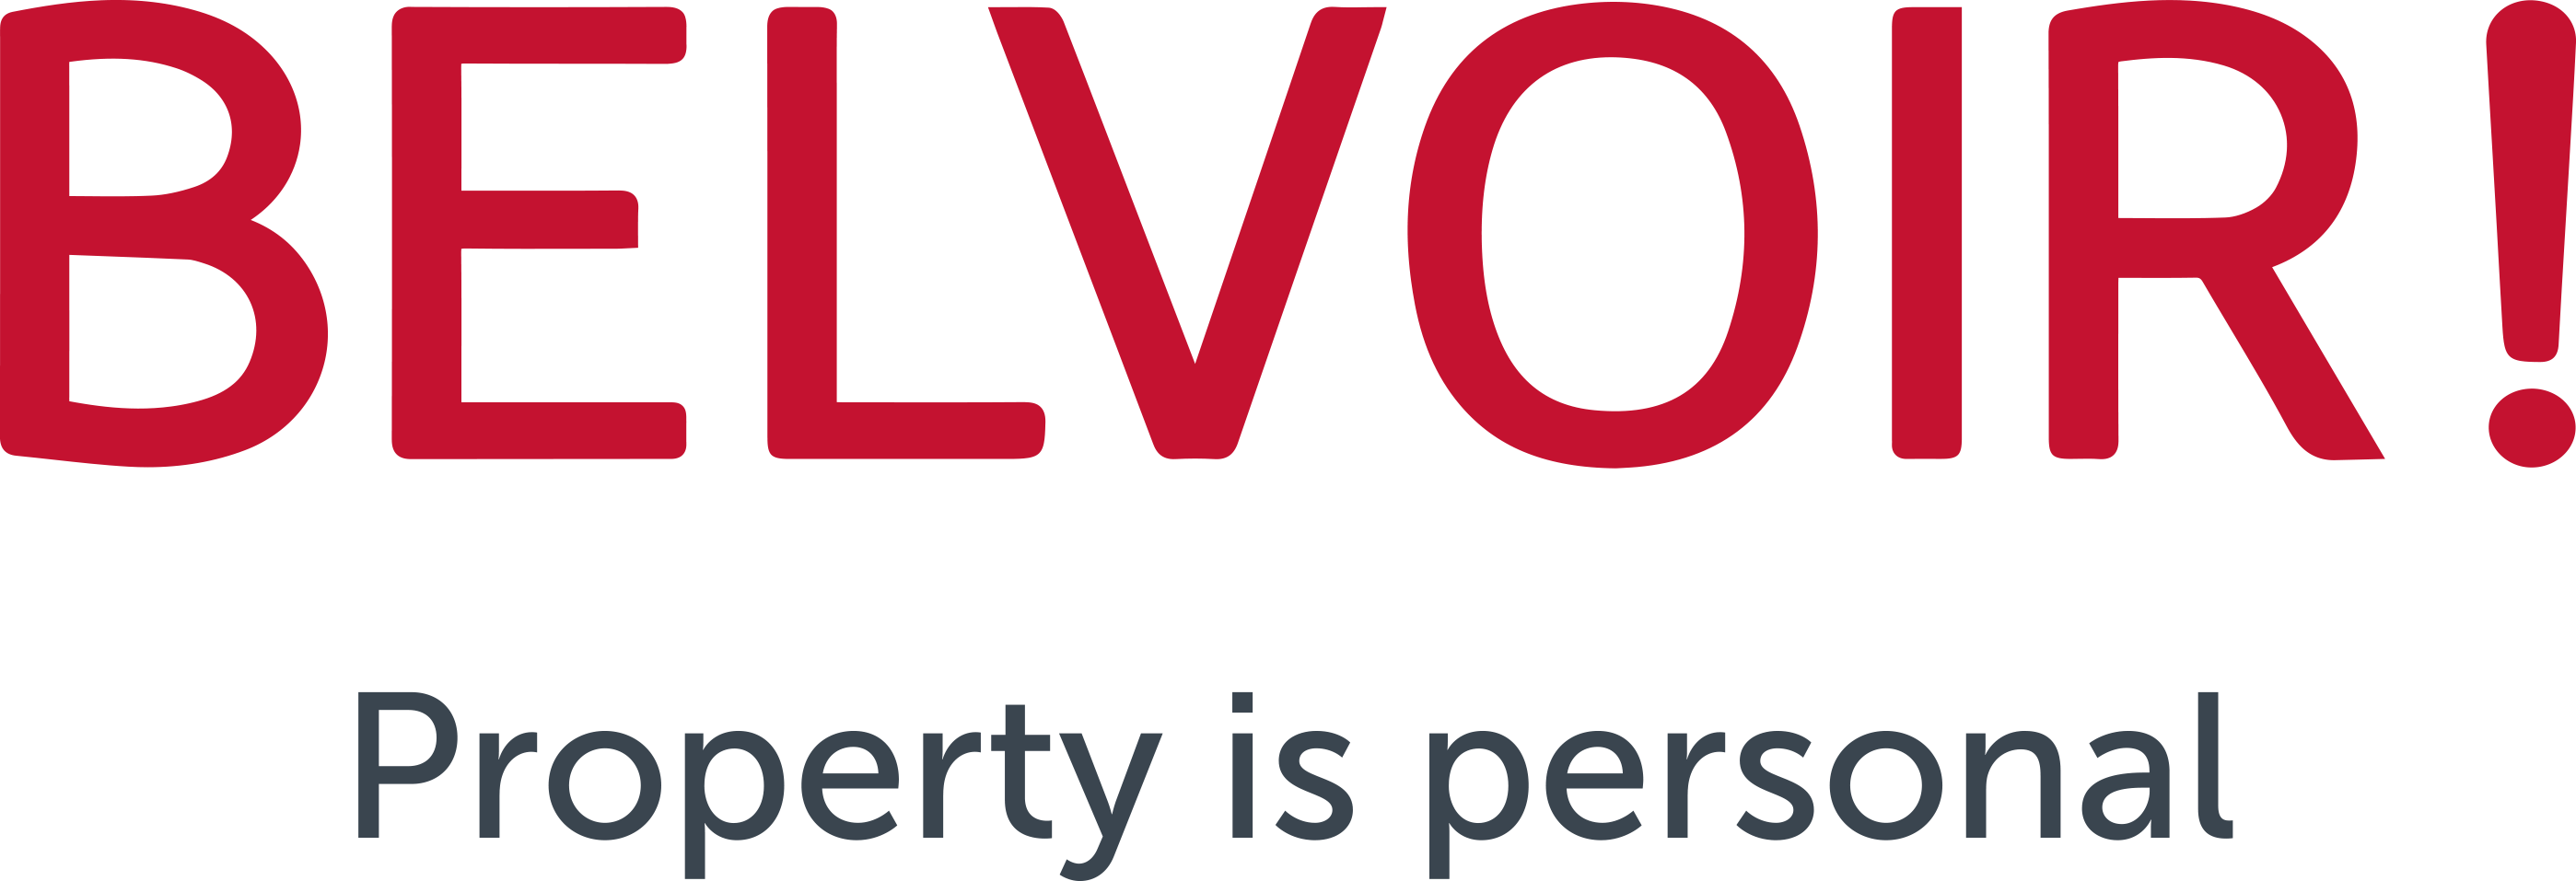 Belvoir launches new logo and strapline in second rebrand in six years - Property Industry Eye